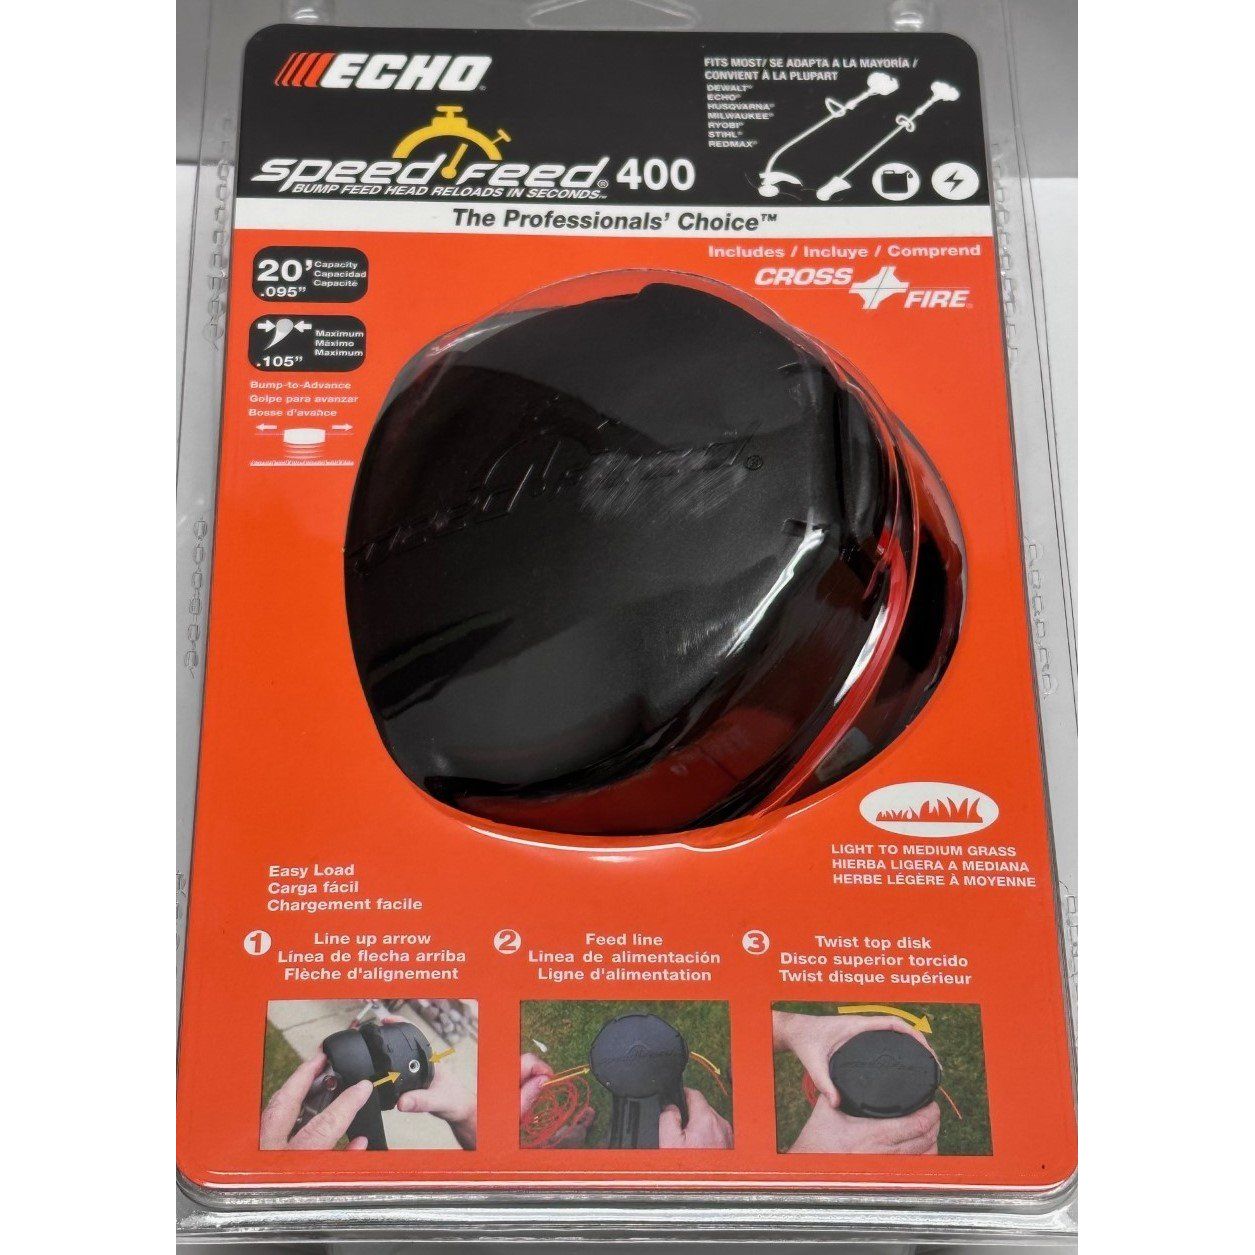 ECHO: 99944200907 Speed Feed 400 CLAMSHELL UNIVERSAL FIT